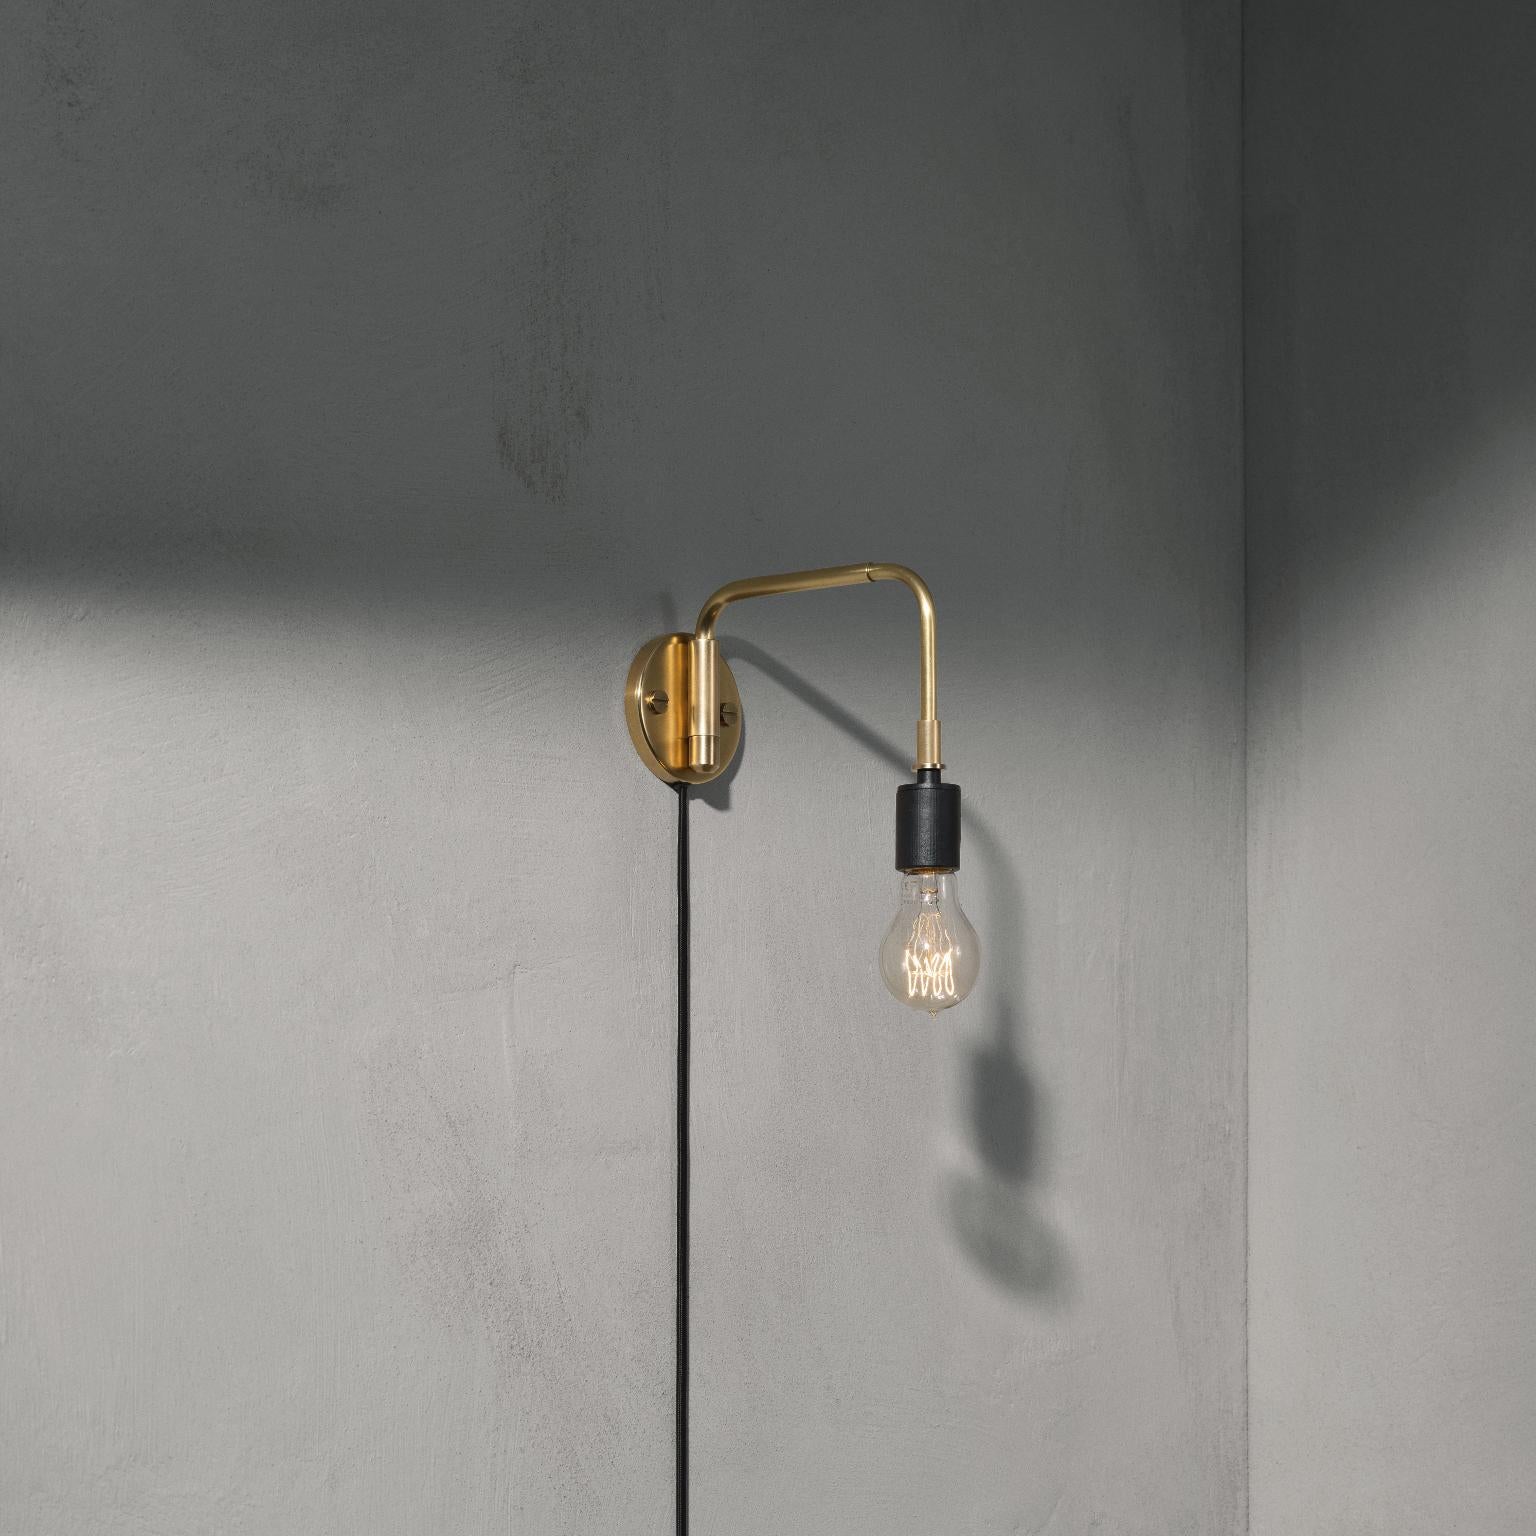 Chinese Tribeca Staple Wall Lamp, Black, and one TR Matte Bulb For Sale